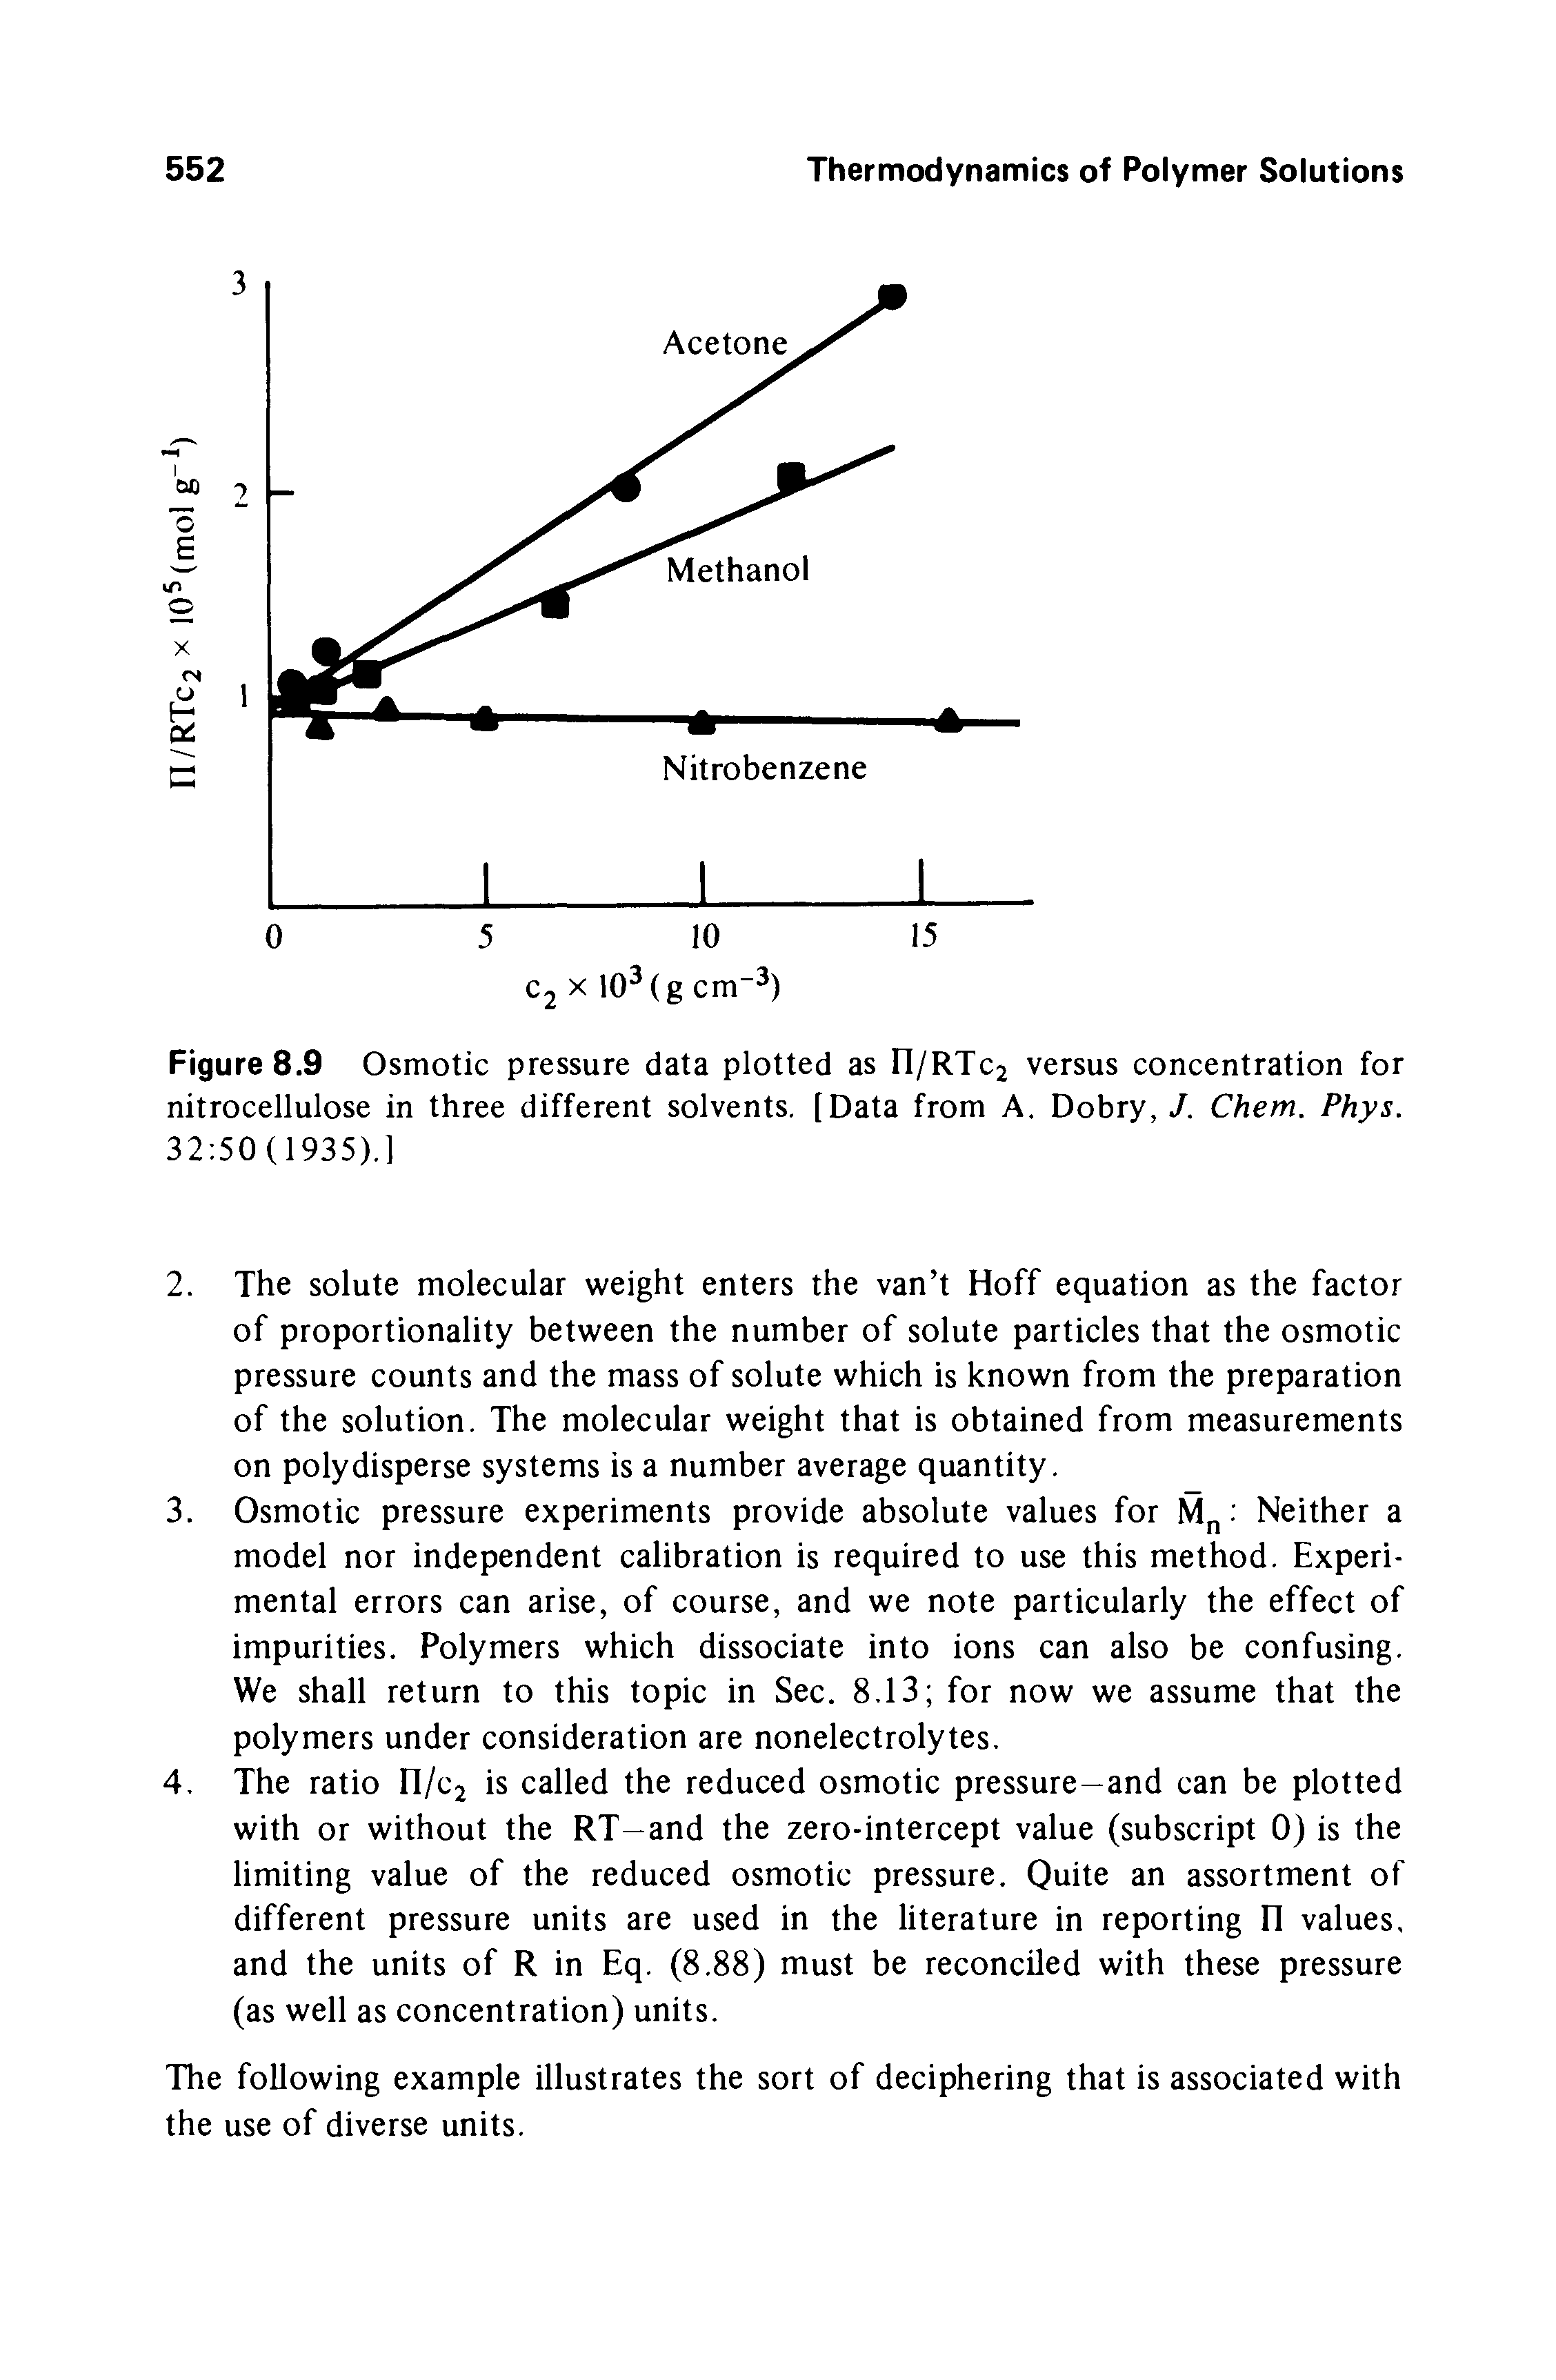 Figure 8.9 Osmotic pressure data plotted as n/RTc2 versus concentration for nitrocellulose in three different solvents. [Data from A. Dobry,/. Chem. Phys. 32 50 (1935).]...